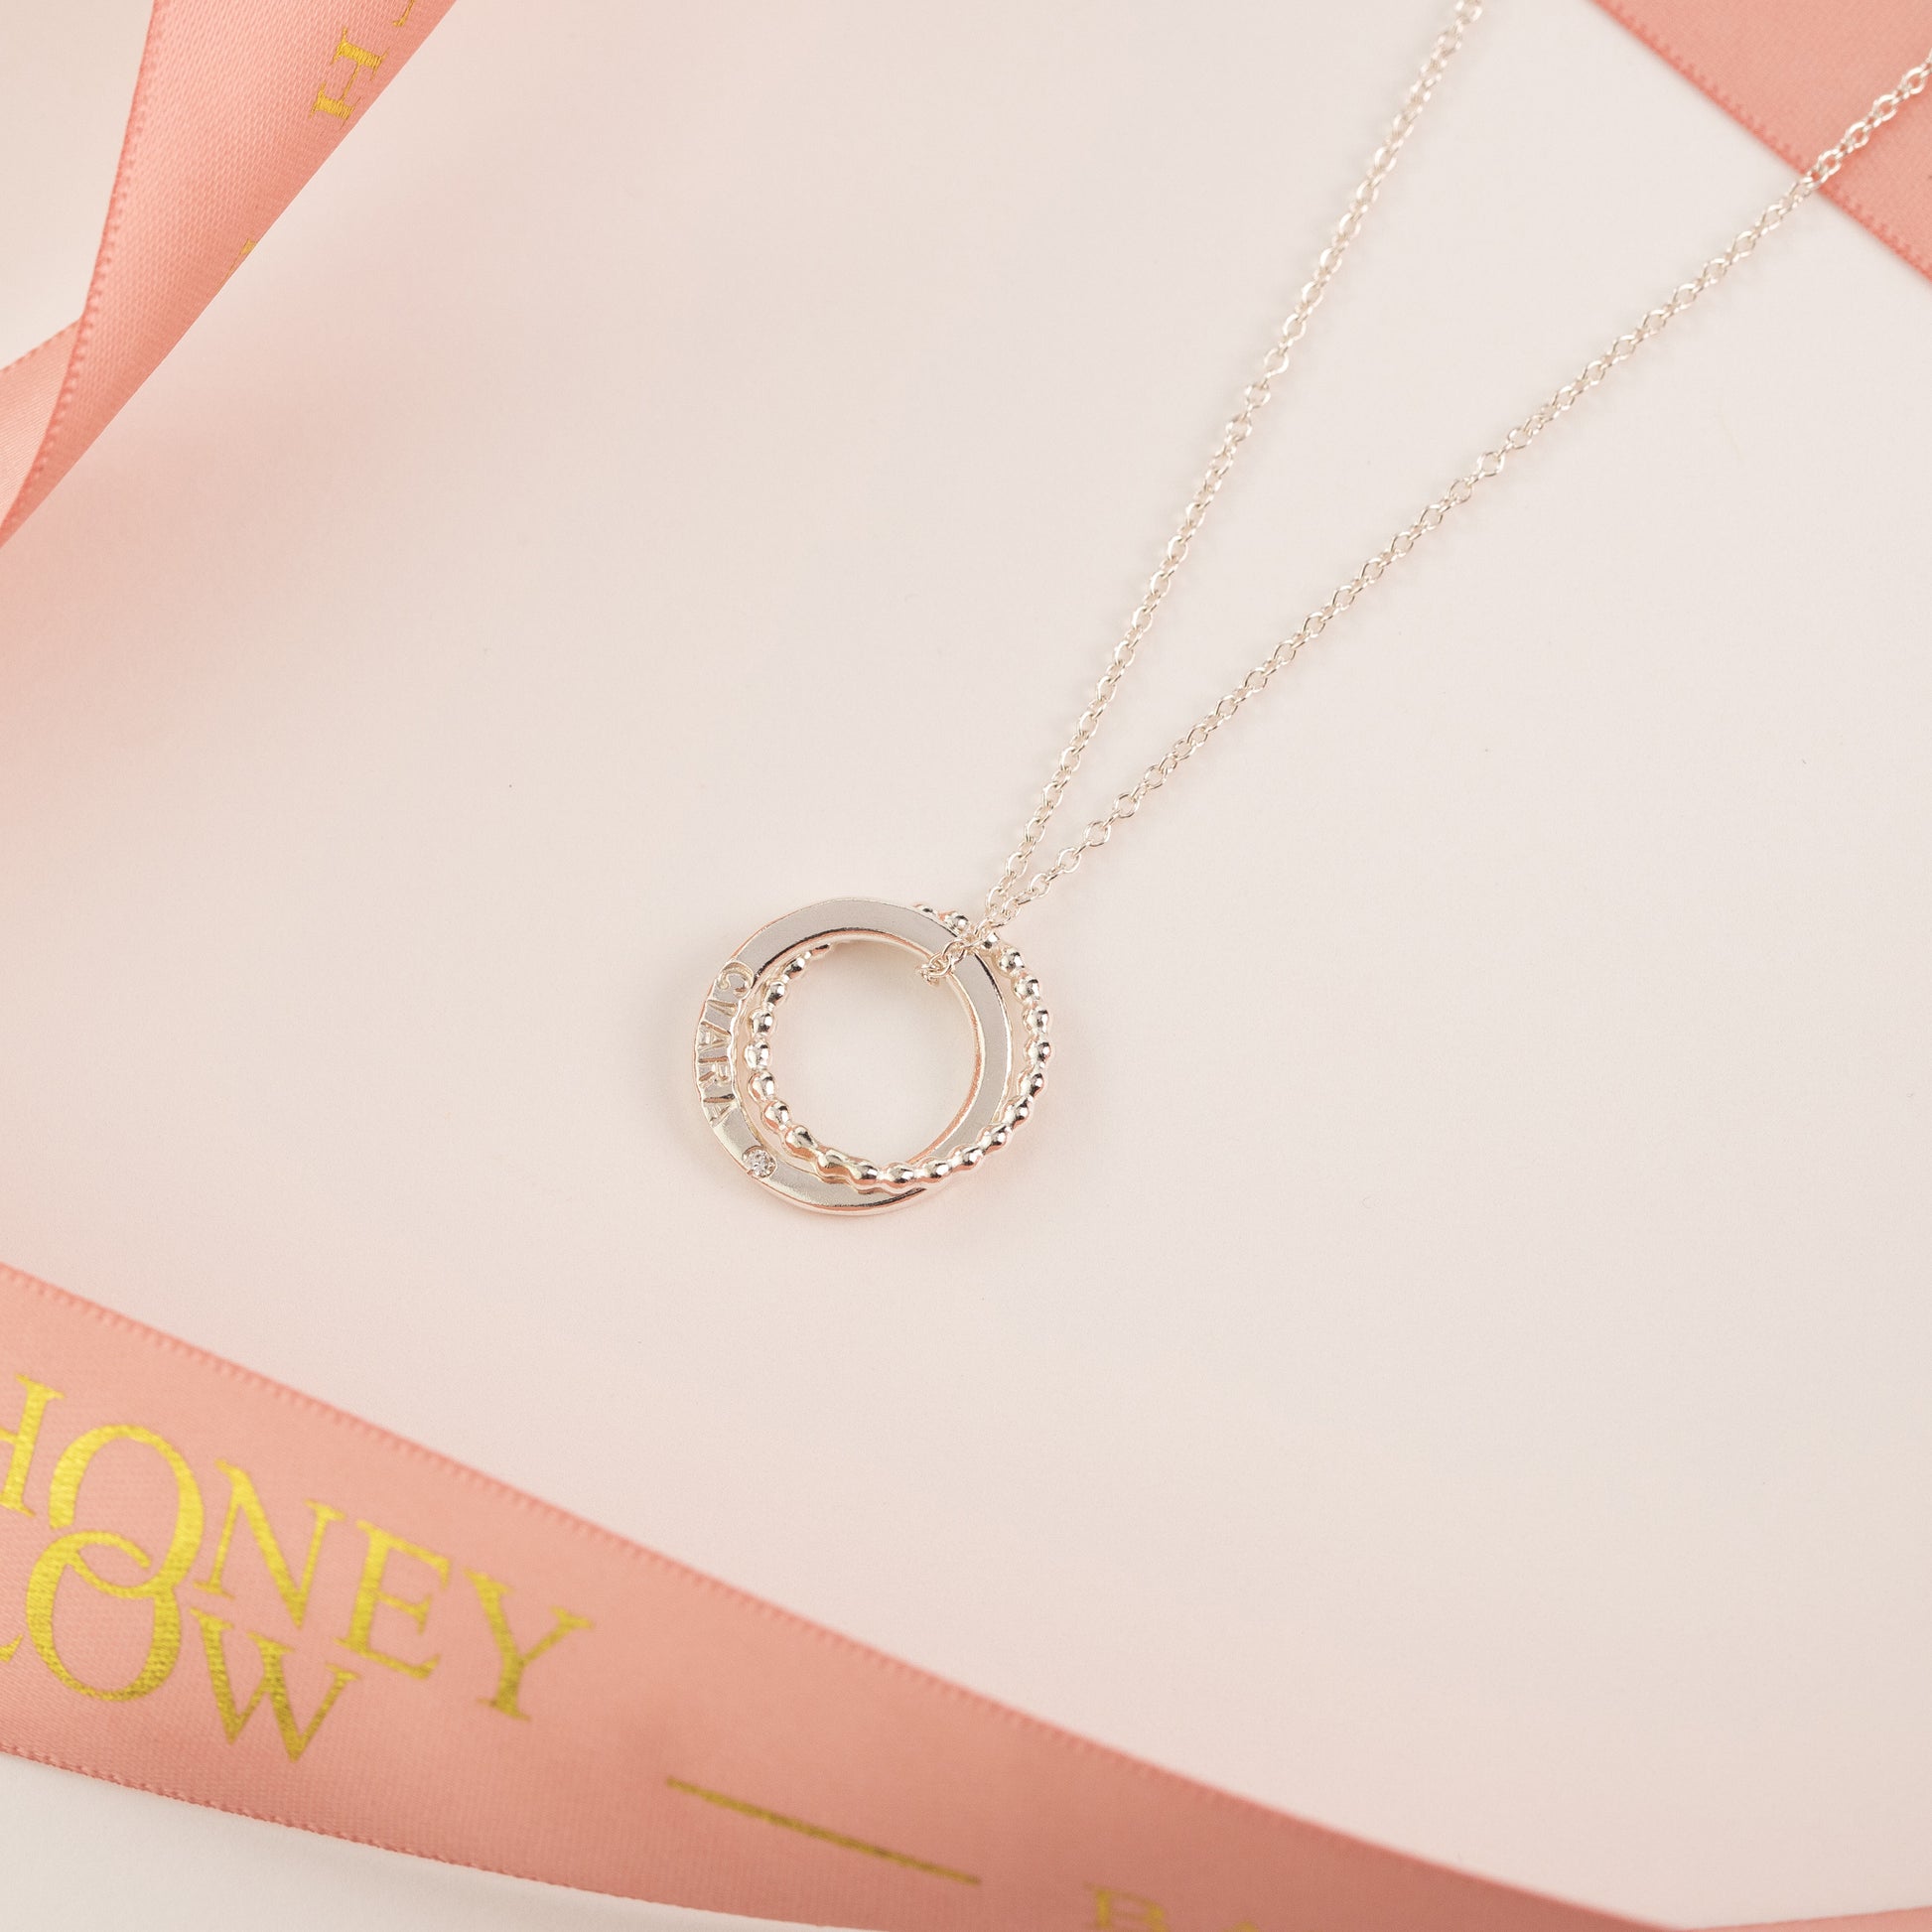 21st Birthday Gift - Personalised Double Link Necklace with Diamond - Silver